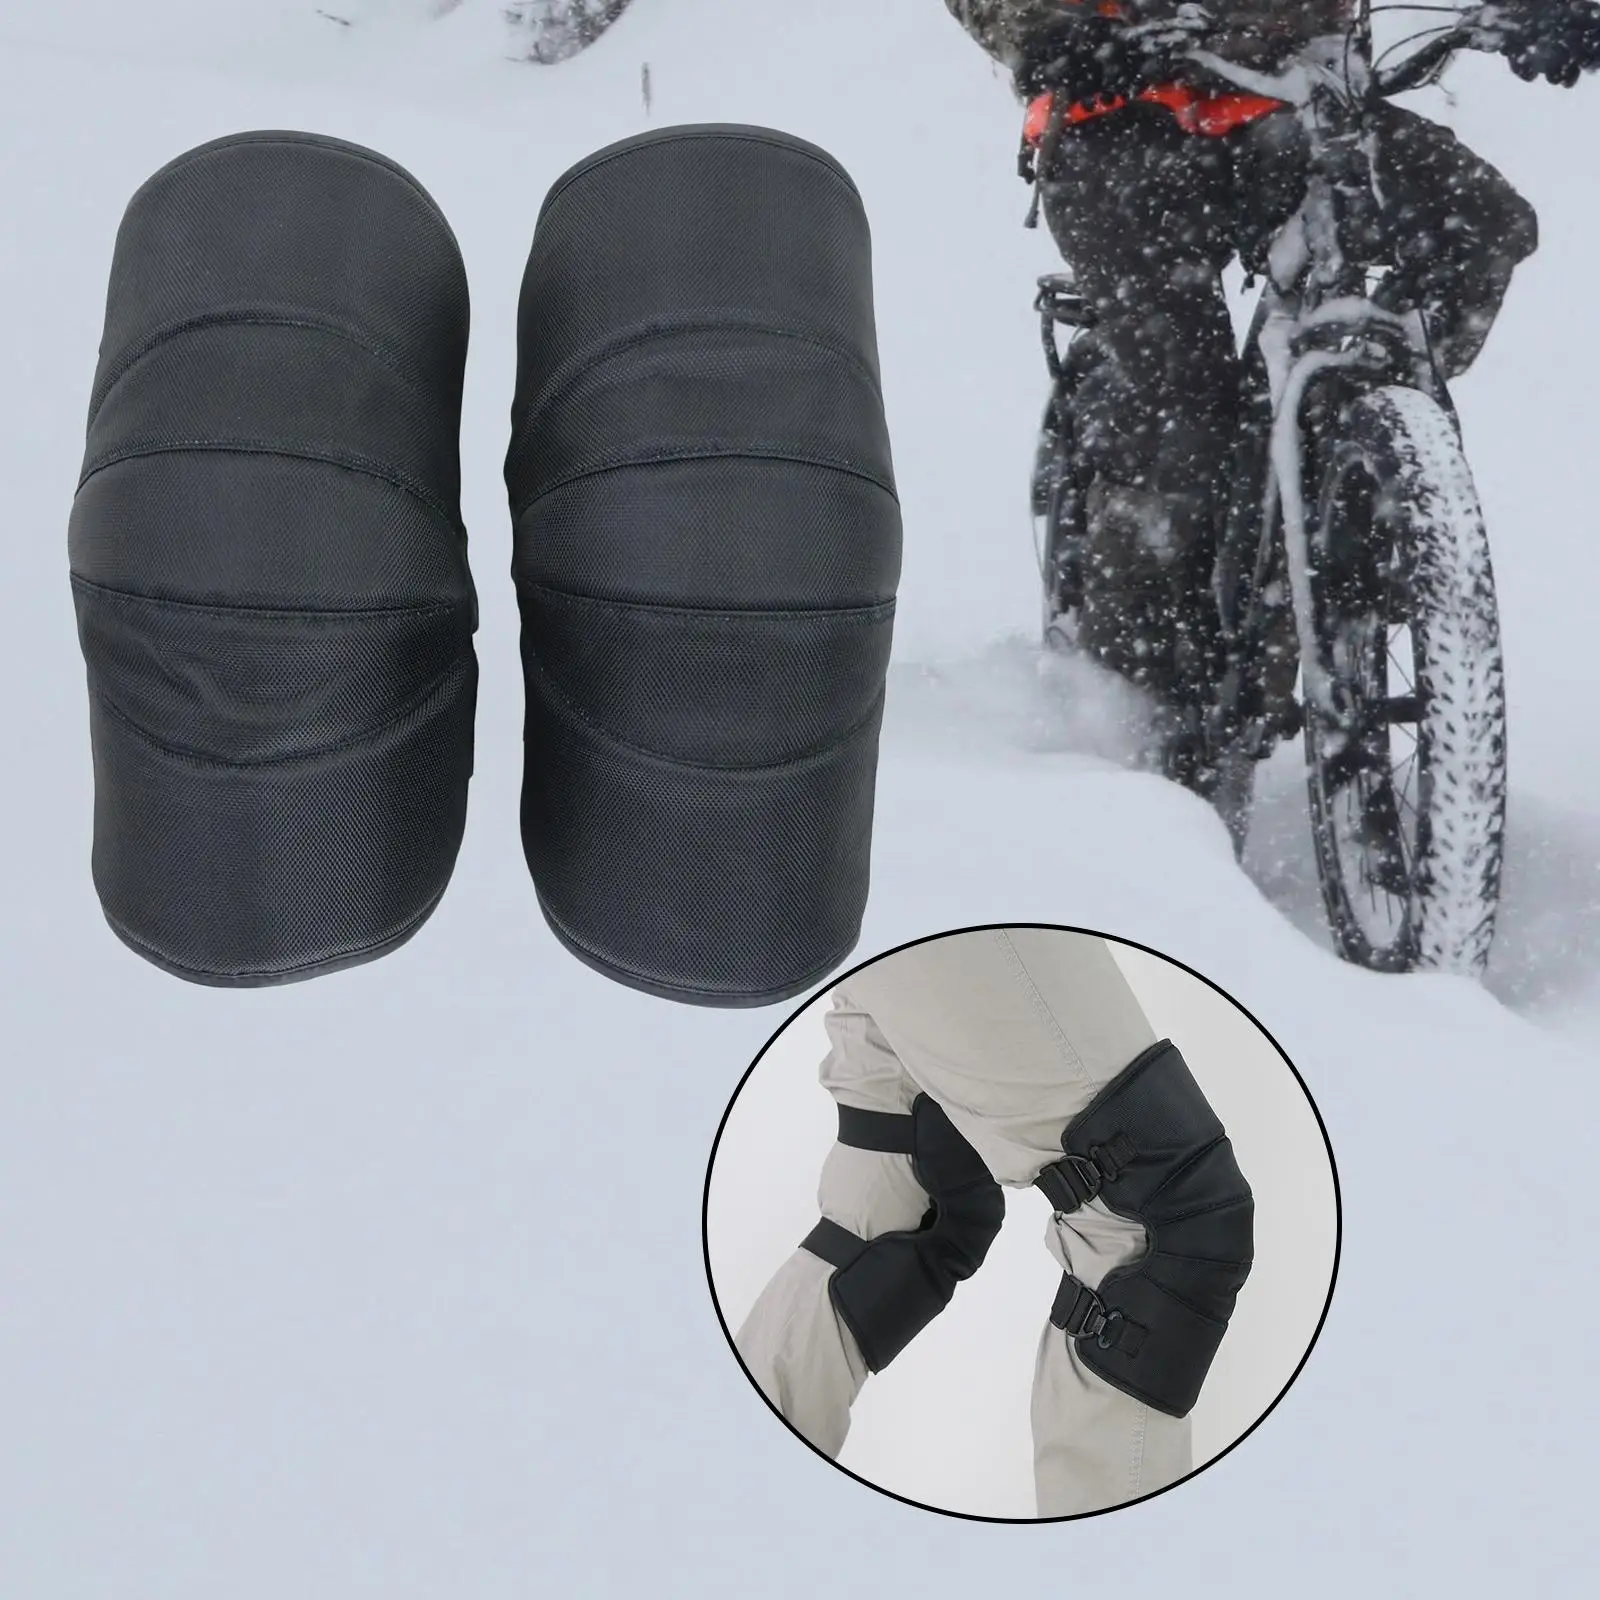 Motorcycle Knee Pads Winter Windproof Elastic Knee Warmers Protective Guards for Riding Skiing Motorcycle Bike Cold Weather